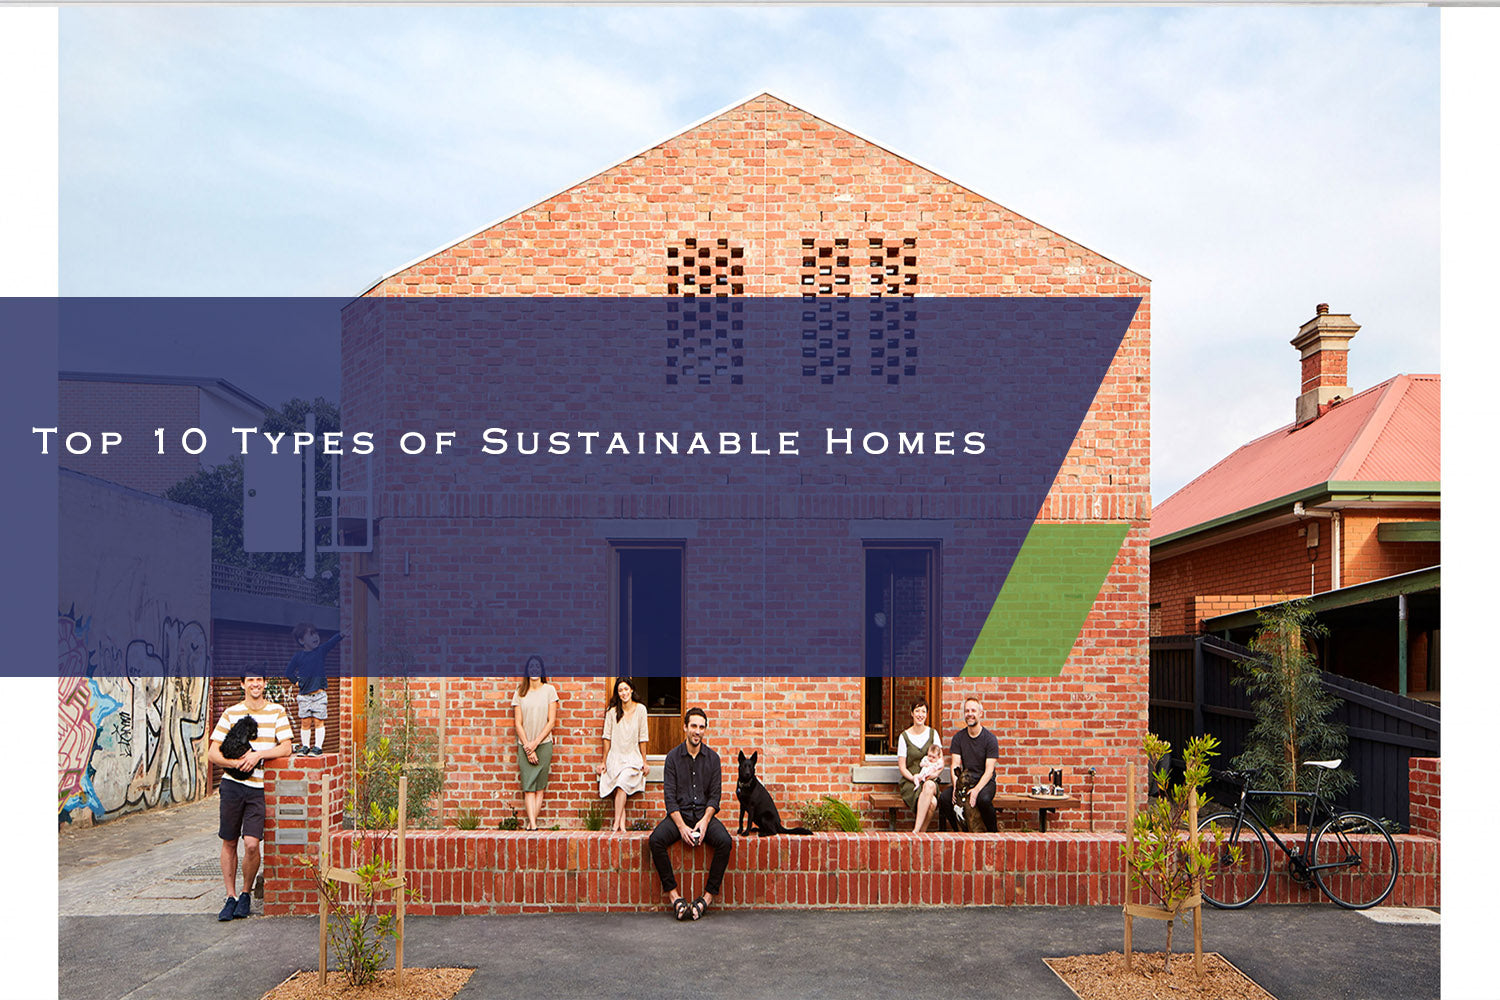 Top 10 Types of Sustainable Homes